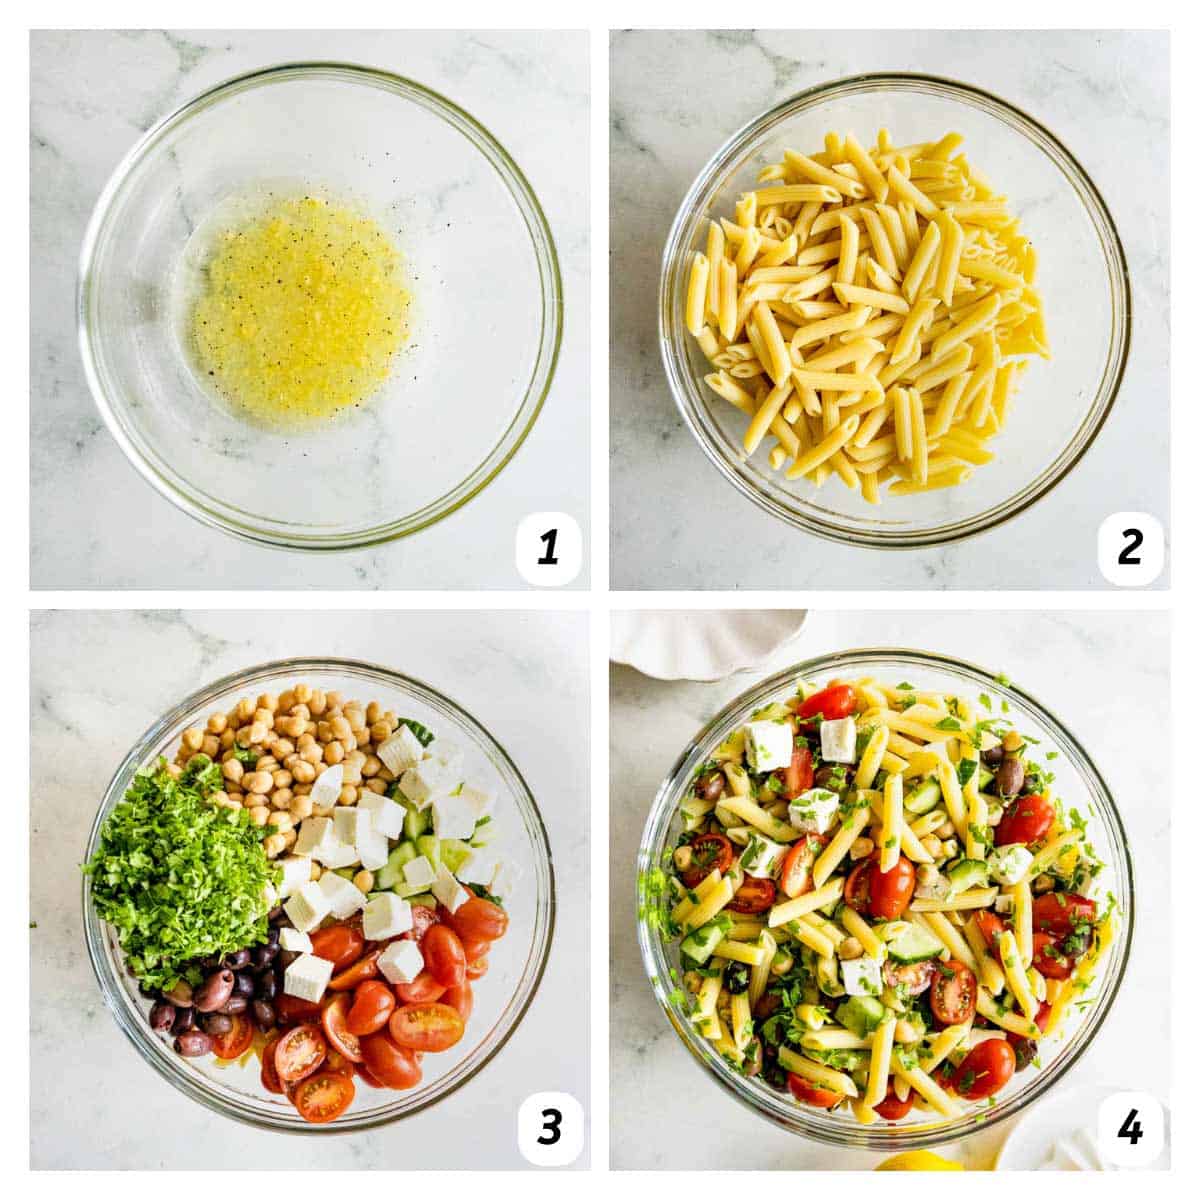 Four panel grid of process shots - combining ingredients gradually to make pasta salad.